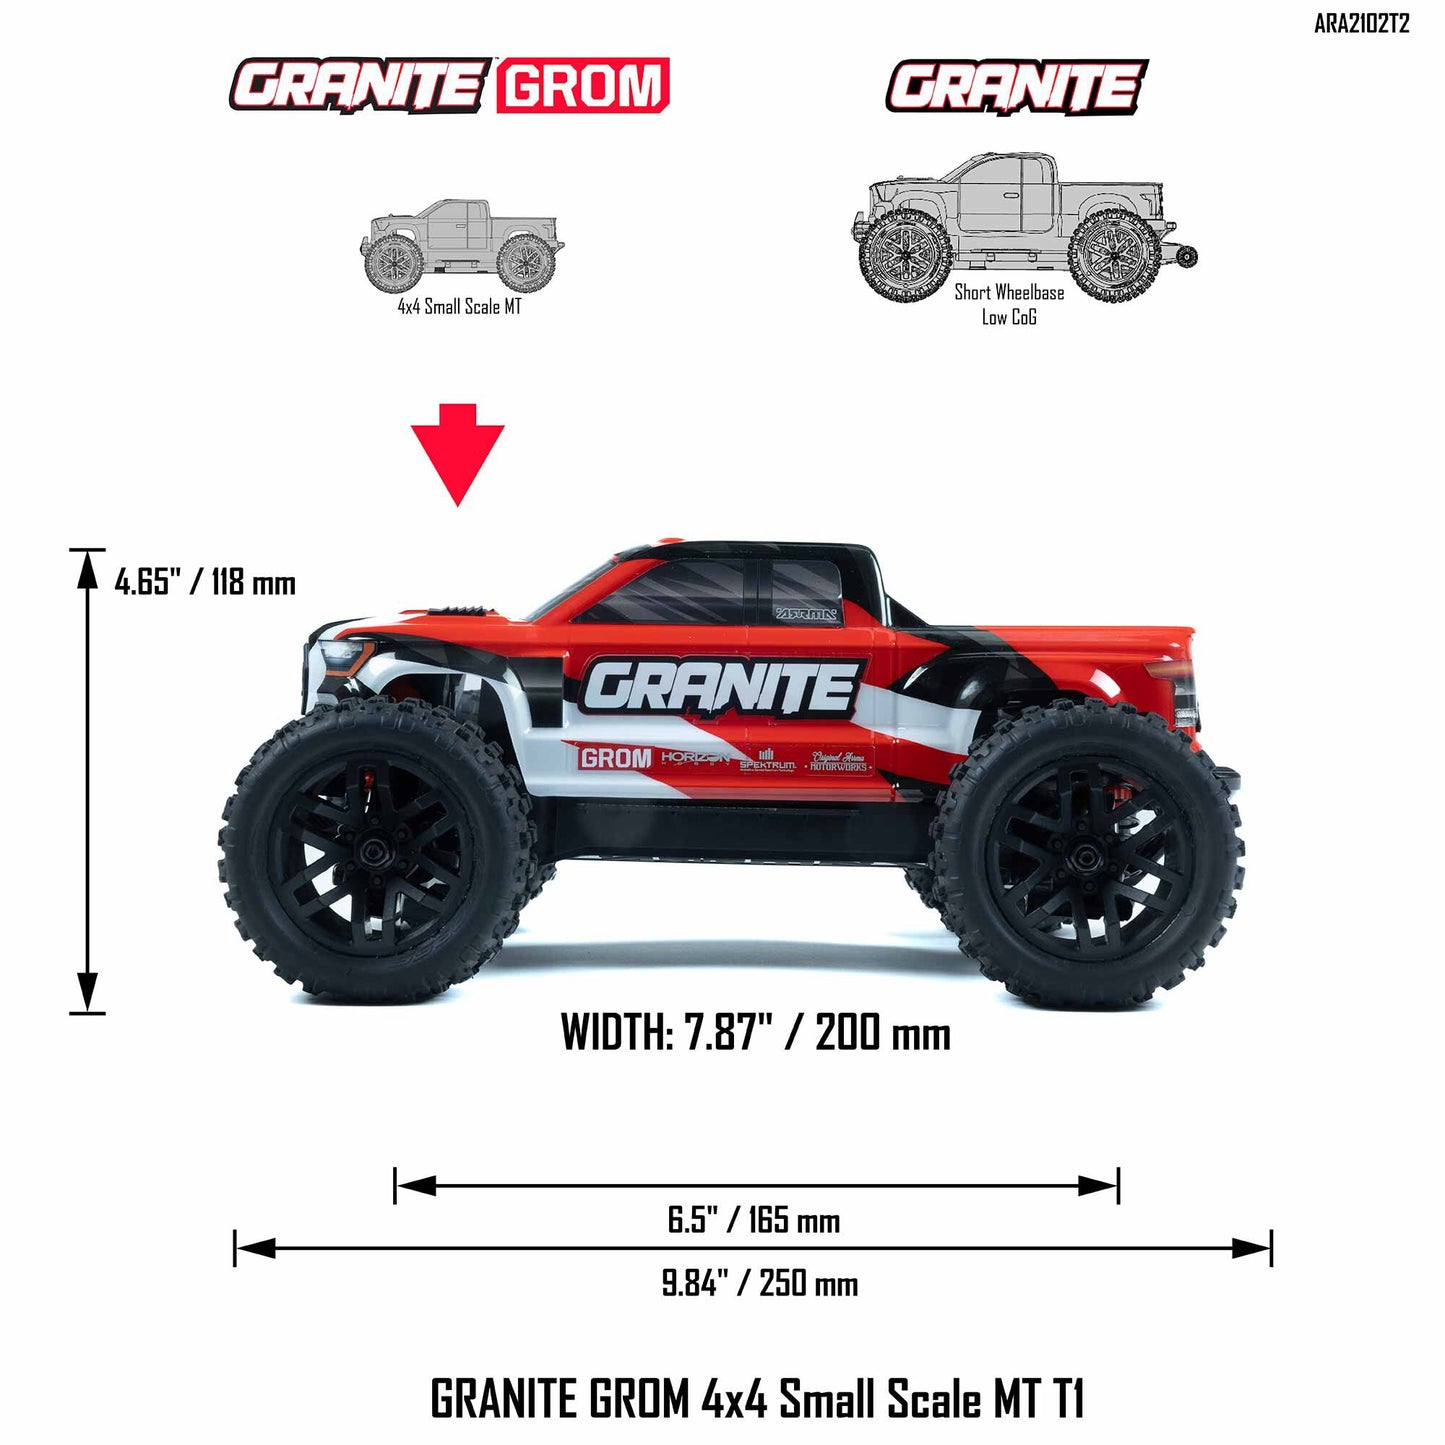 Arrma Granite Grom   4x4 Small Scale MT, Red